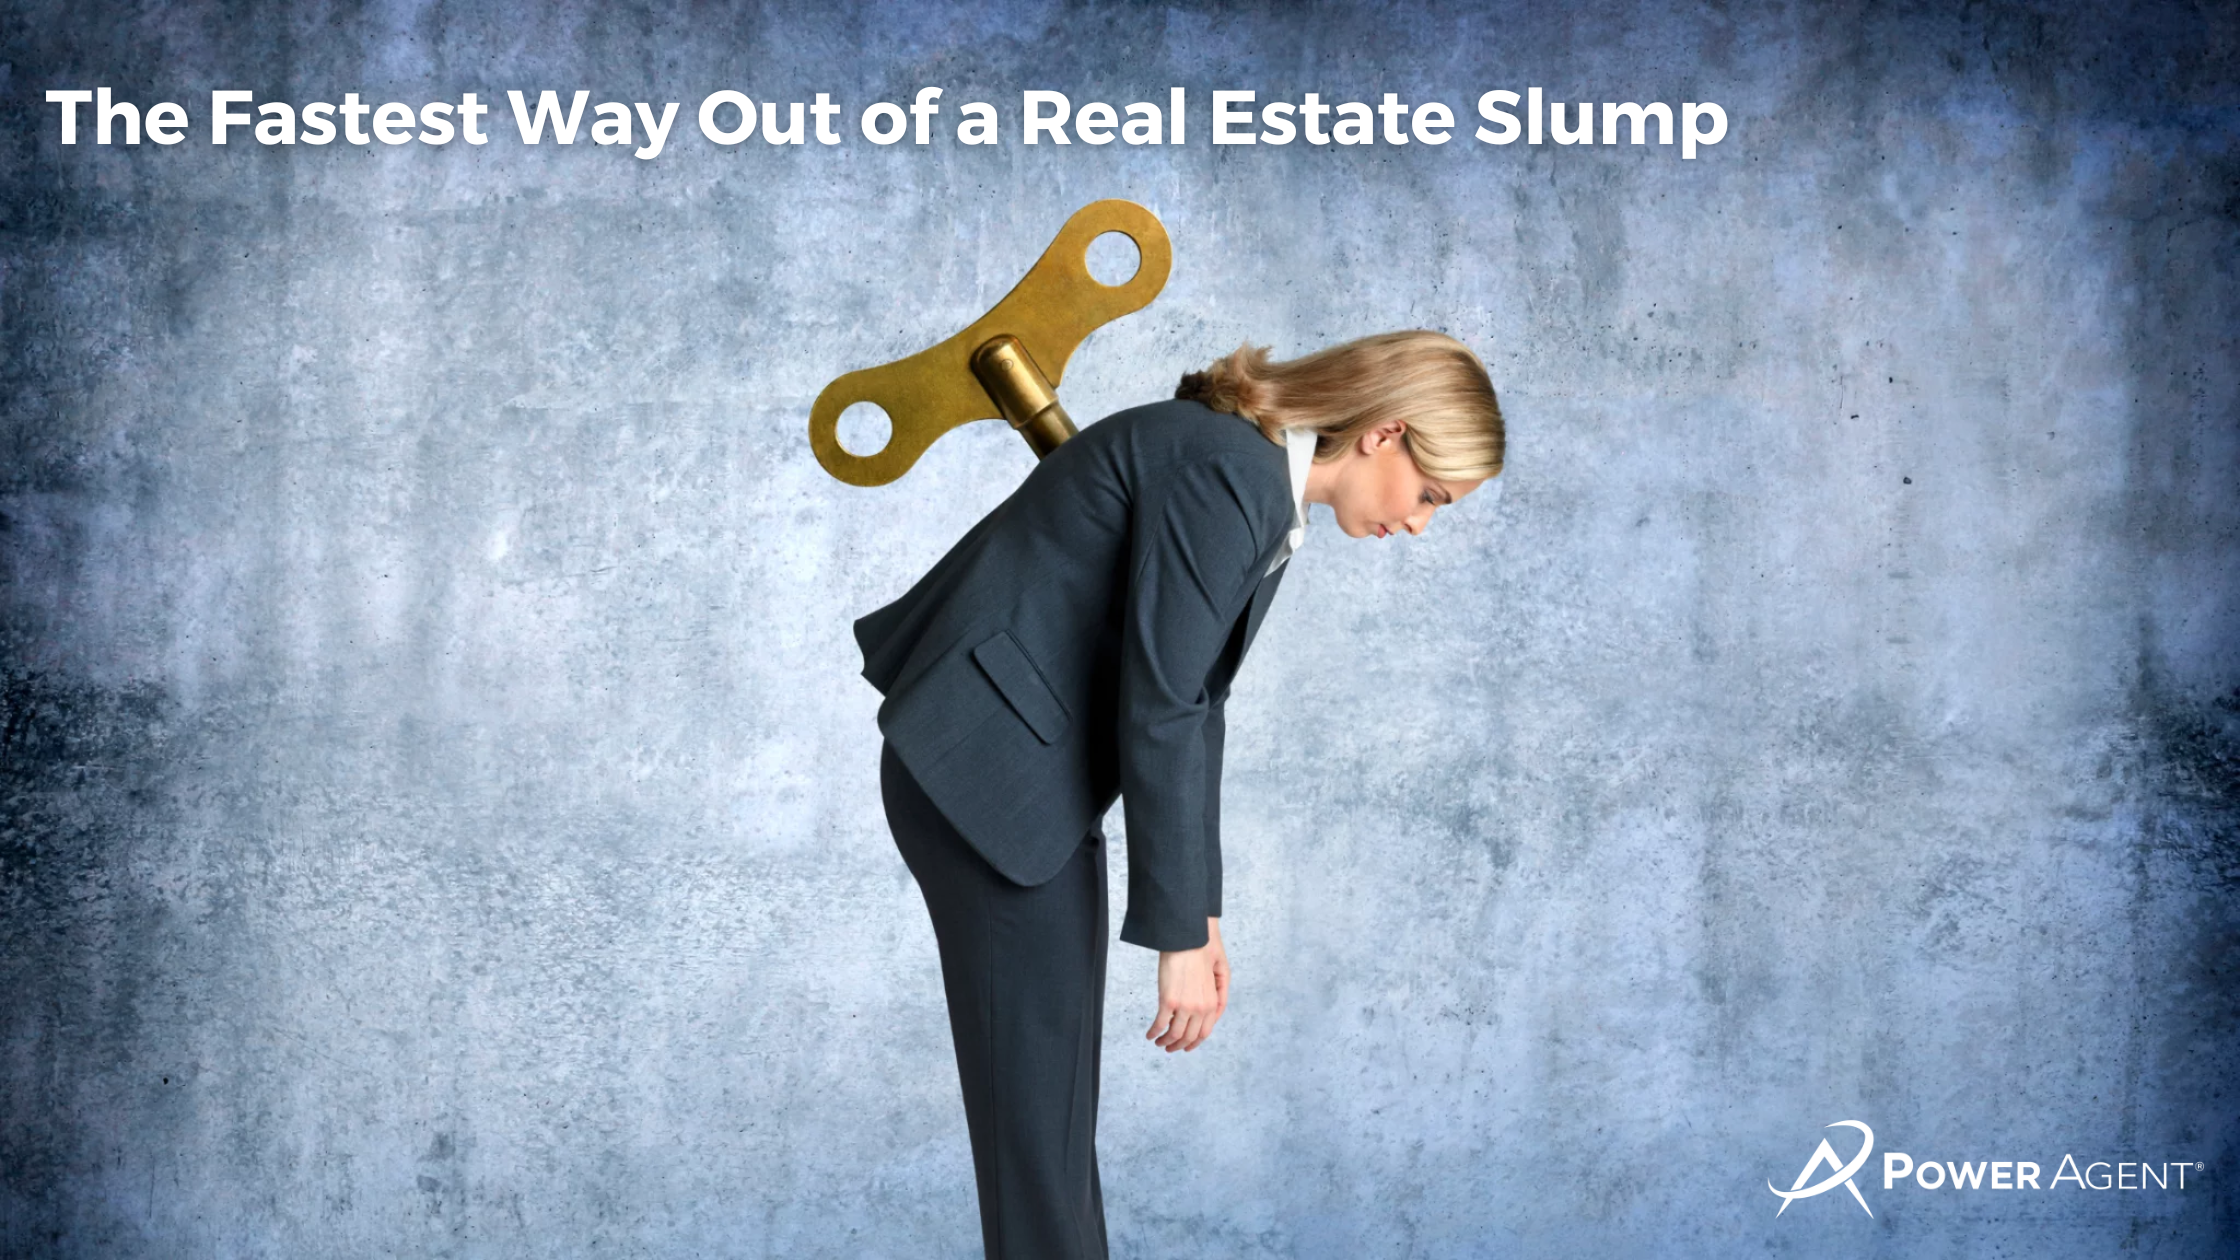 The Fastest Way Out of a Real Estate Slump